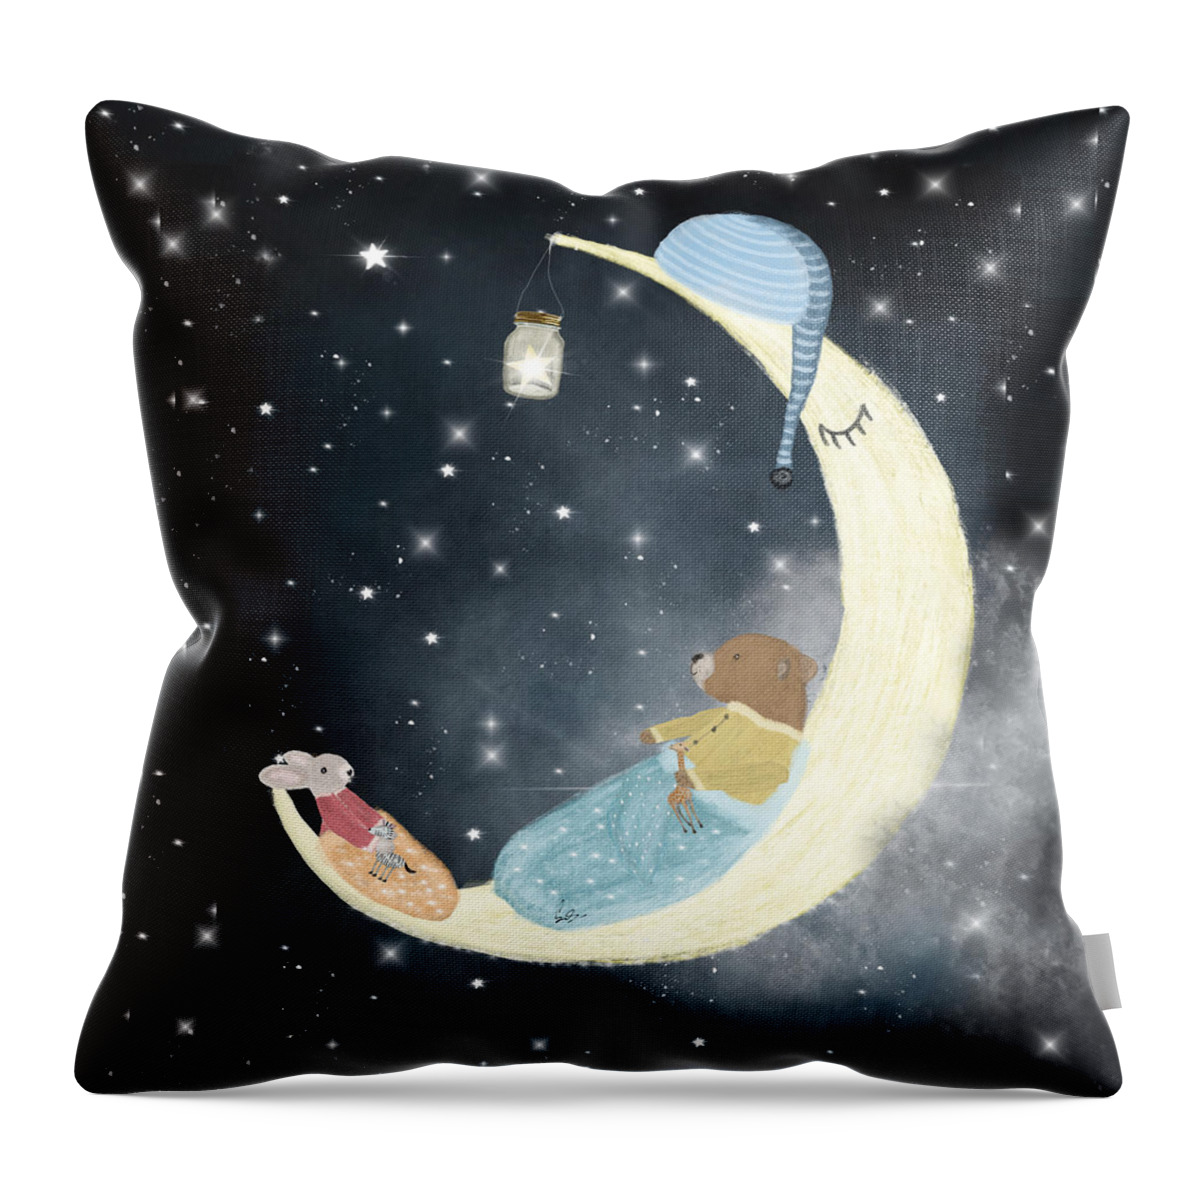 Childrens Throw Pillow featuring the painting Little Bedtime by Bri Buckley